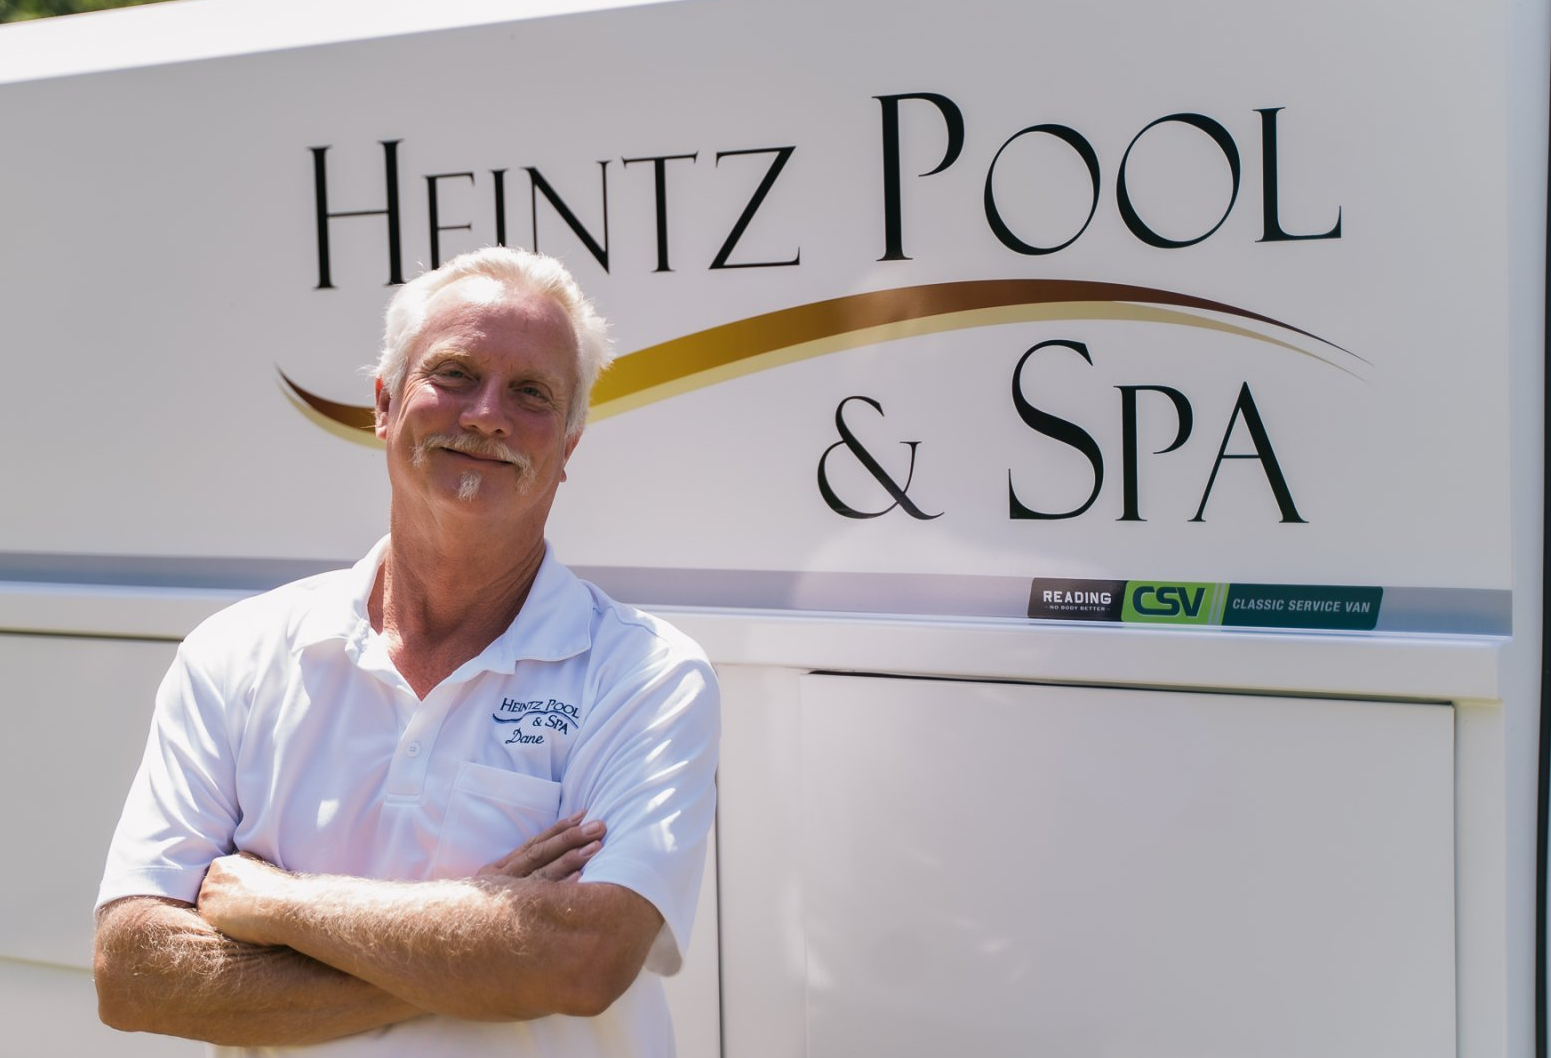 Man in white polo standing in front of Heintz Pool & Spa truck